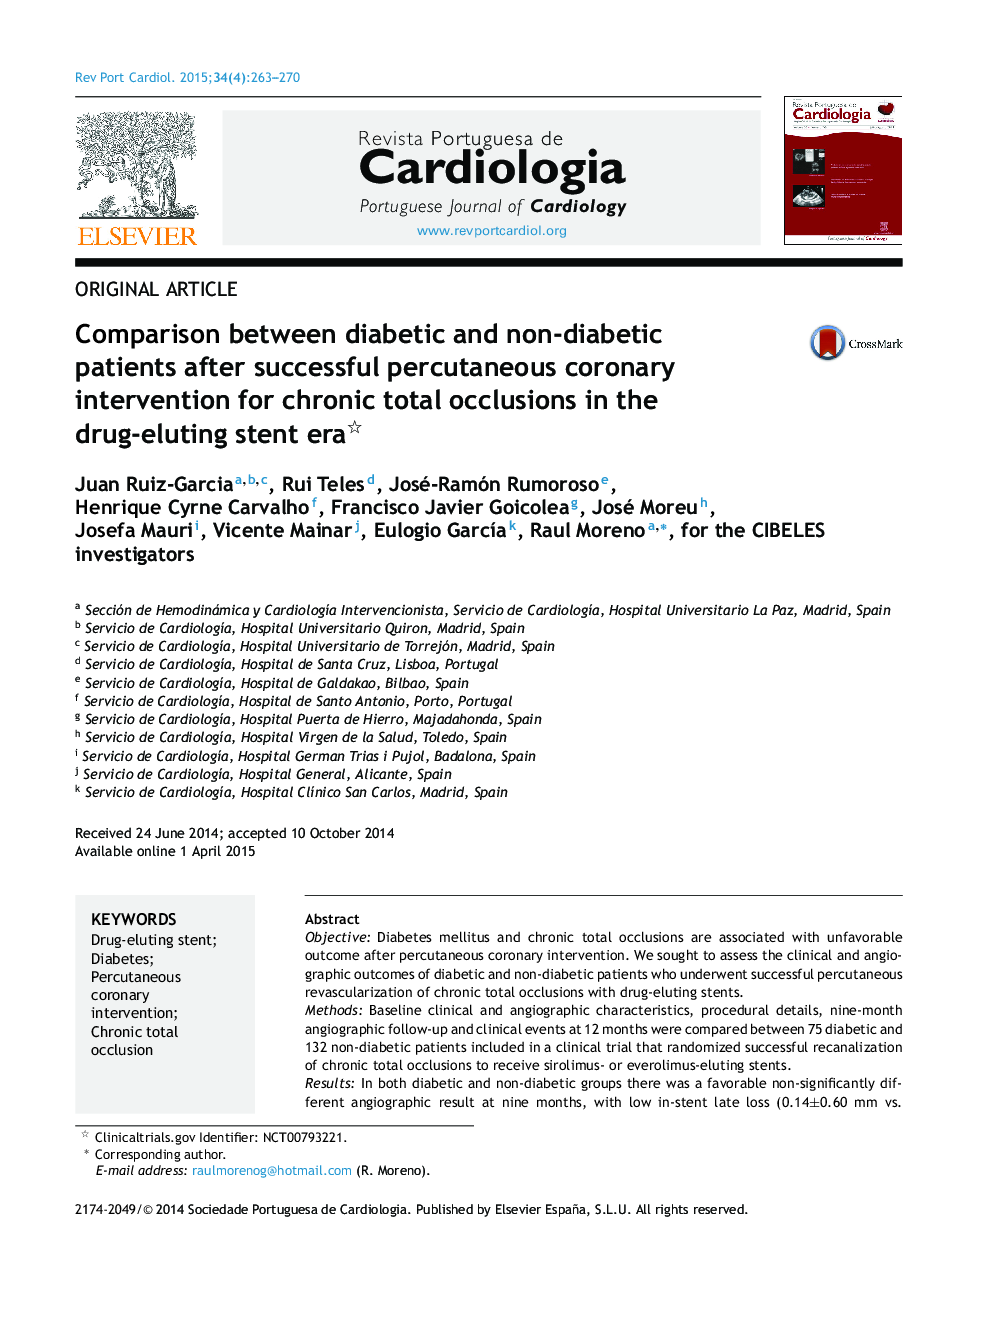 Comparison between diabetic and non-diabetic patients after successful percutaneous coronary intervention for chronic total occlusions in the drug-eluting stent era 